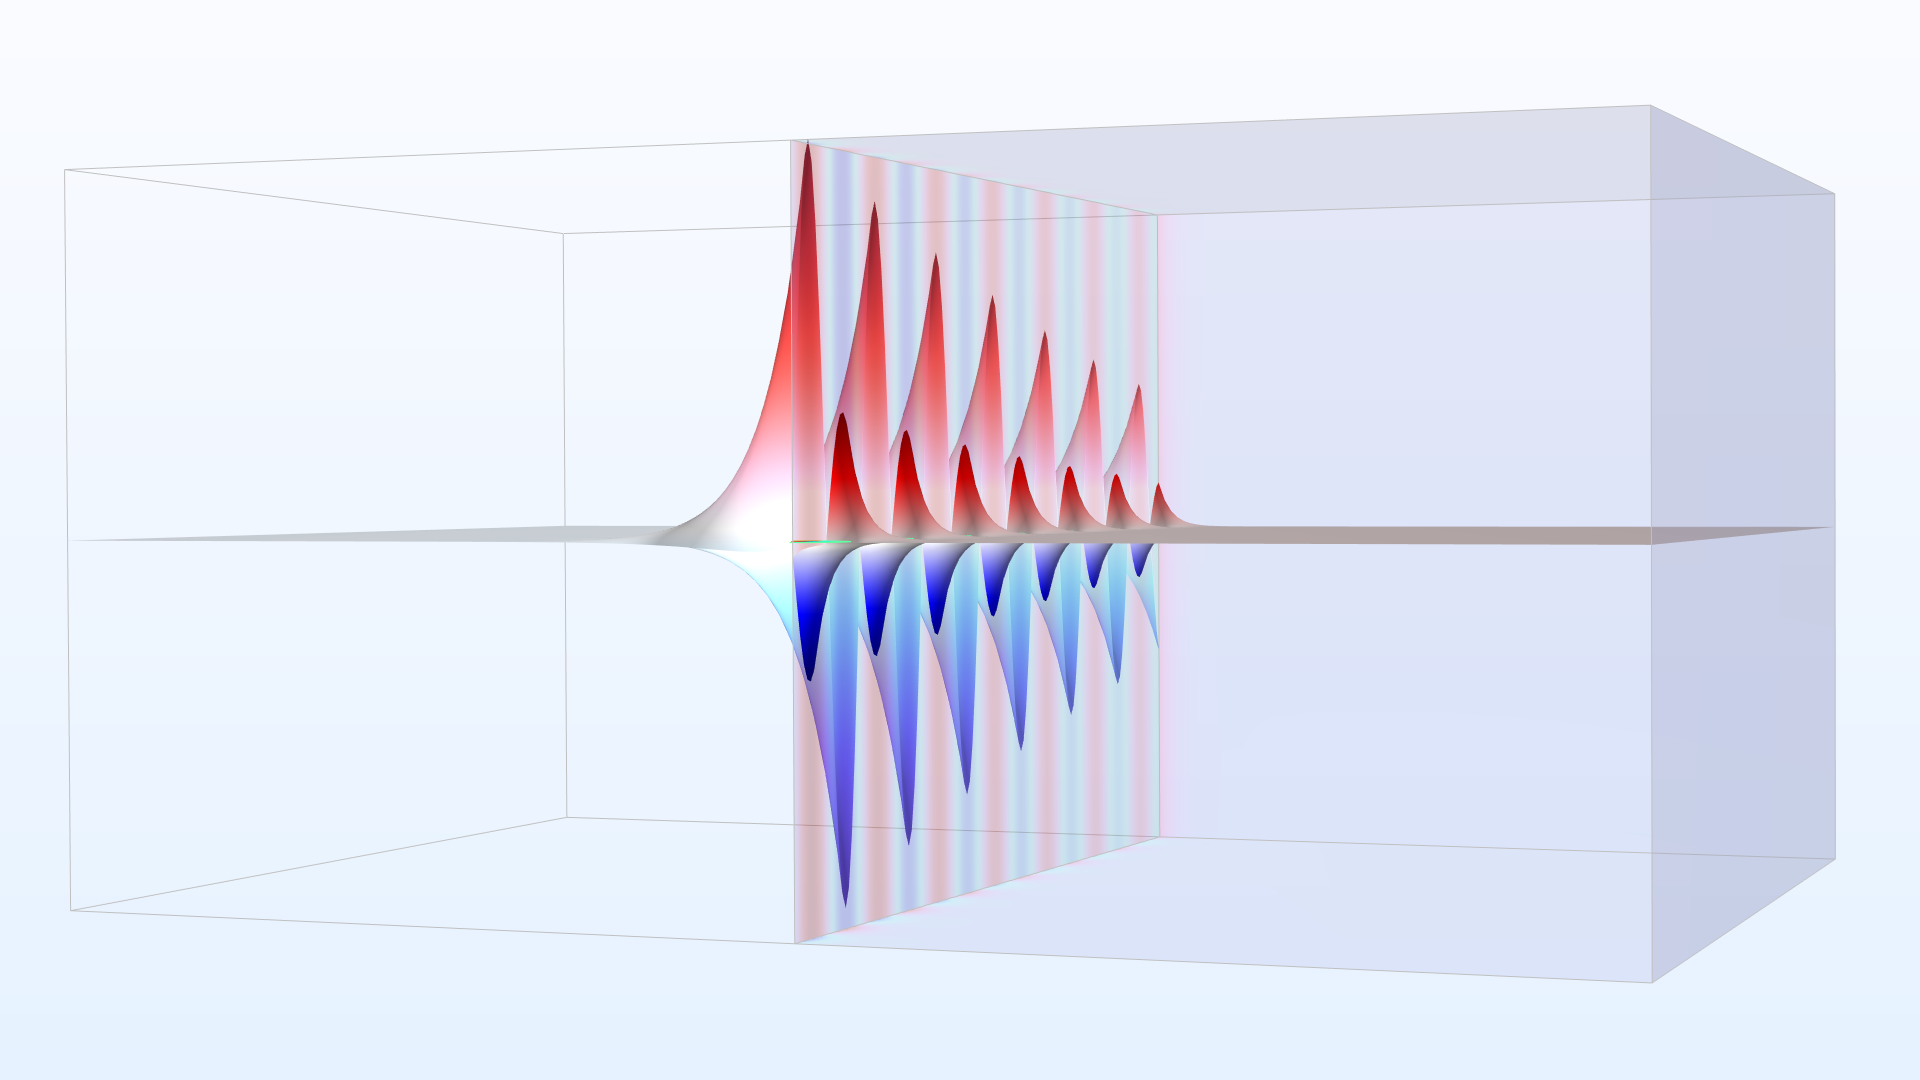 A surface plasmon polariton wave model showing the wave propagation in the Wave color table.